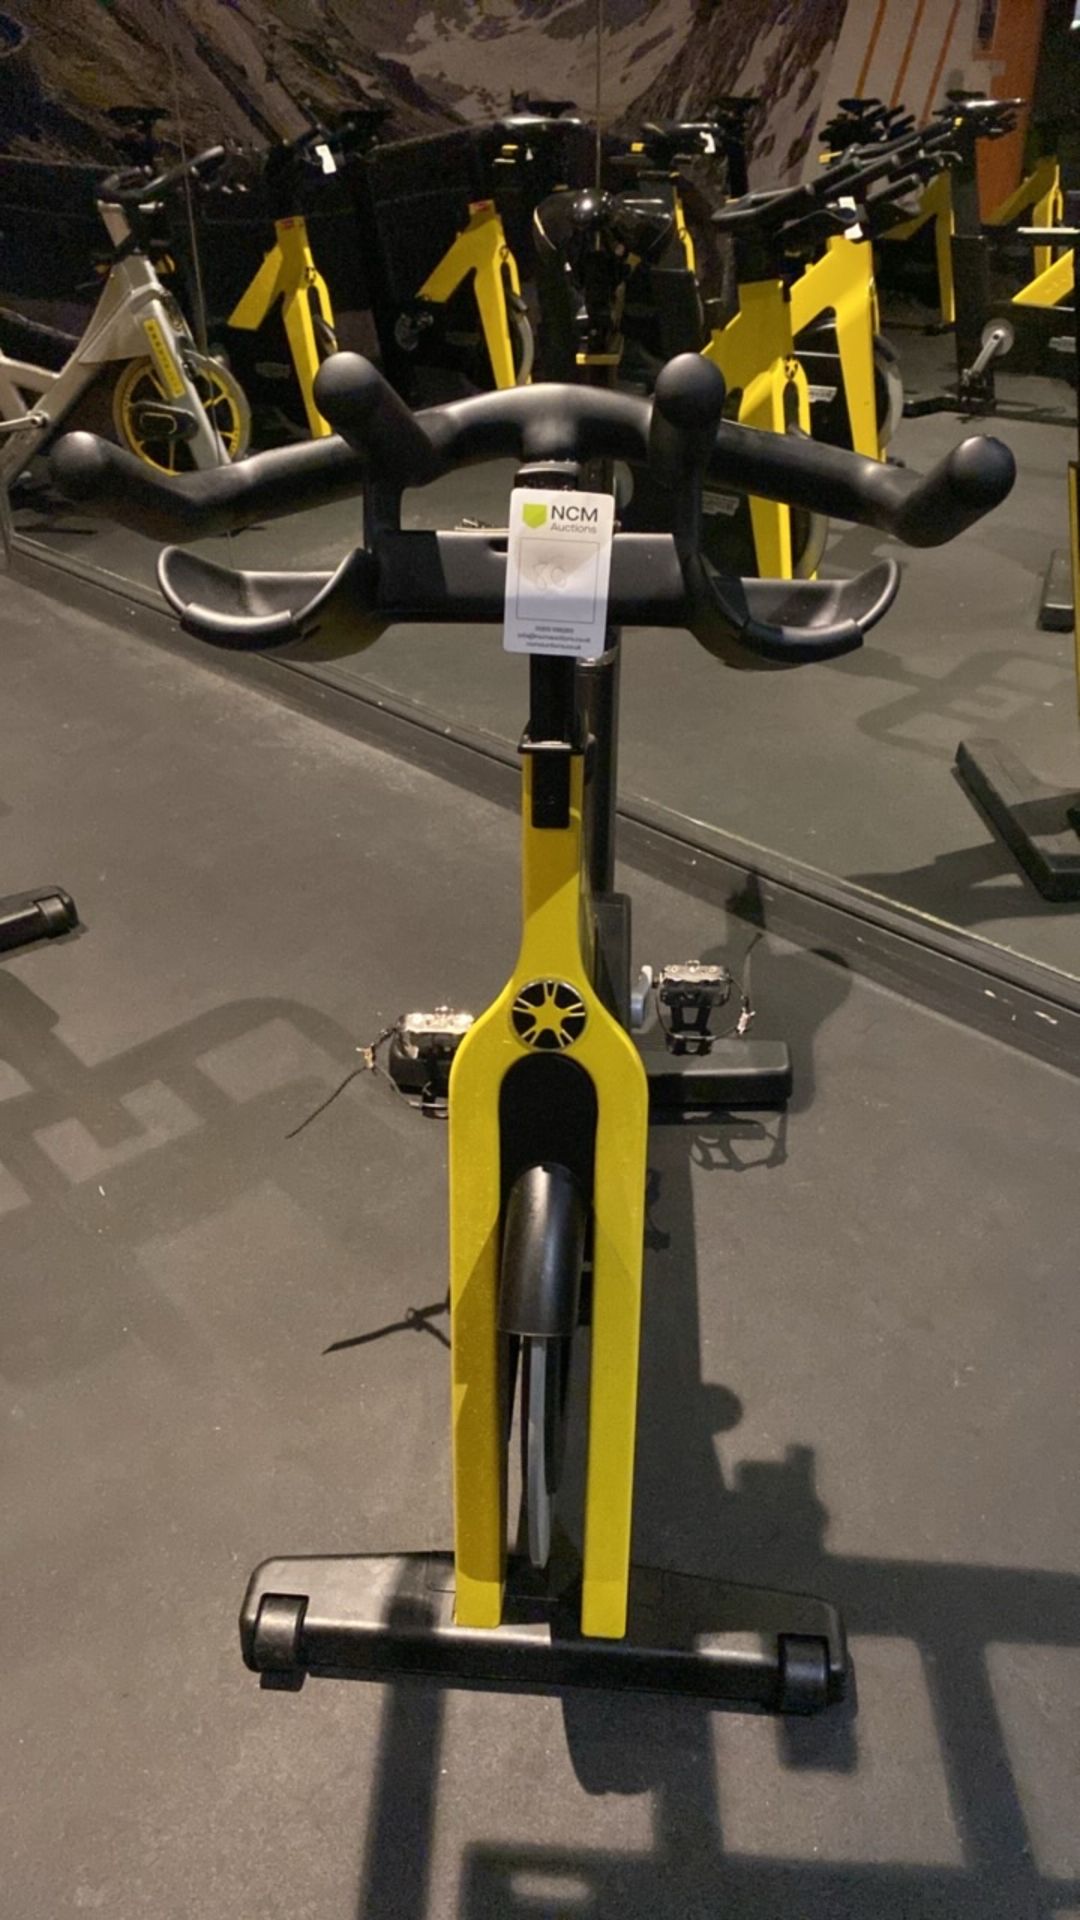 Technogym Group Cycle Ride Spin Bike - Image 10 of 10